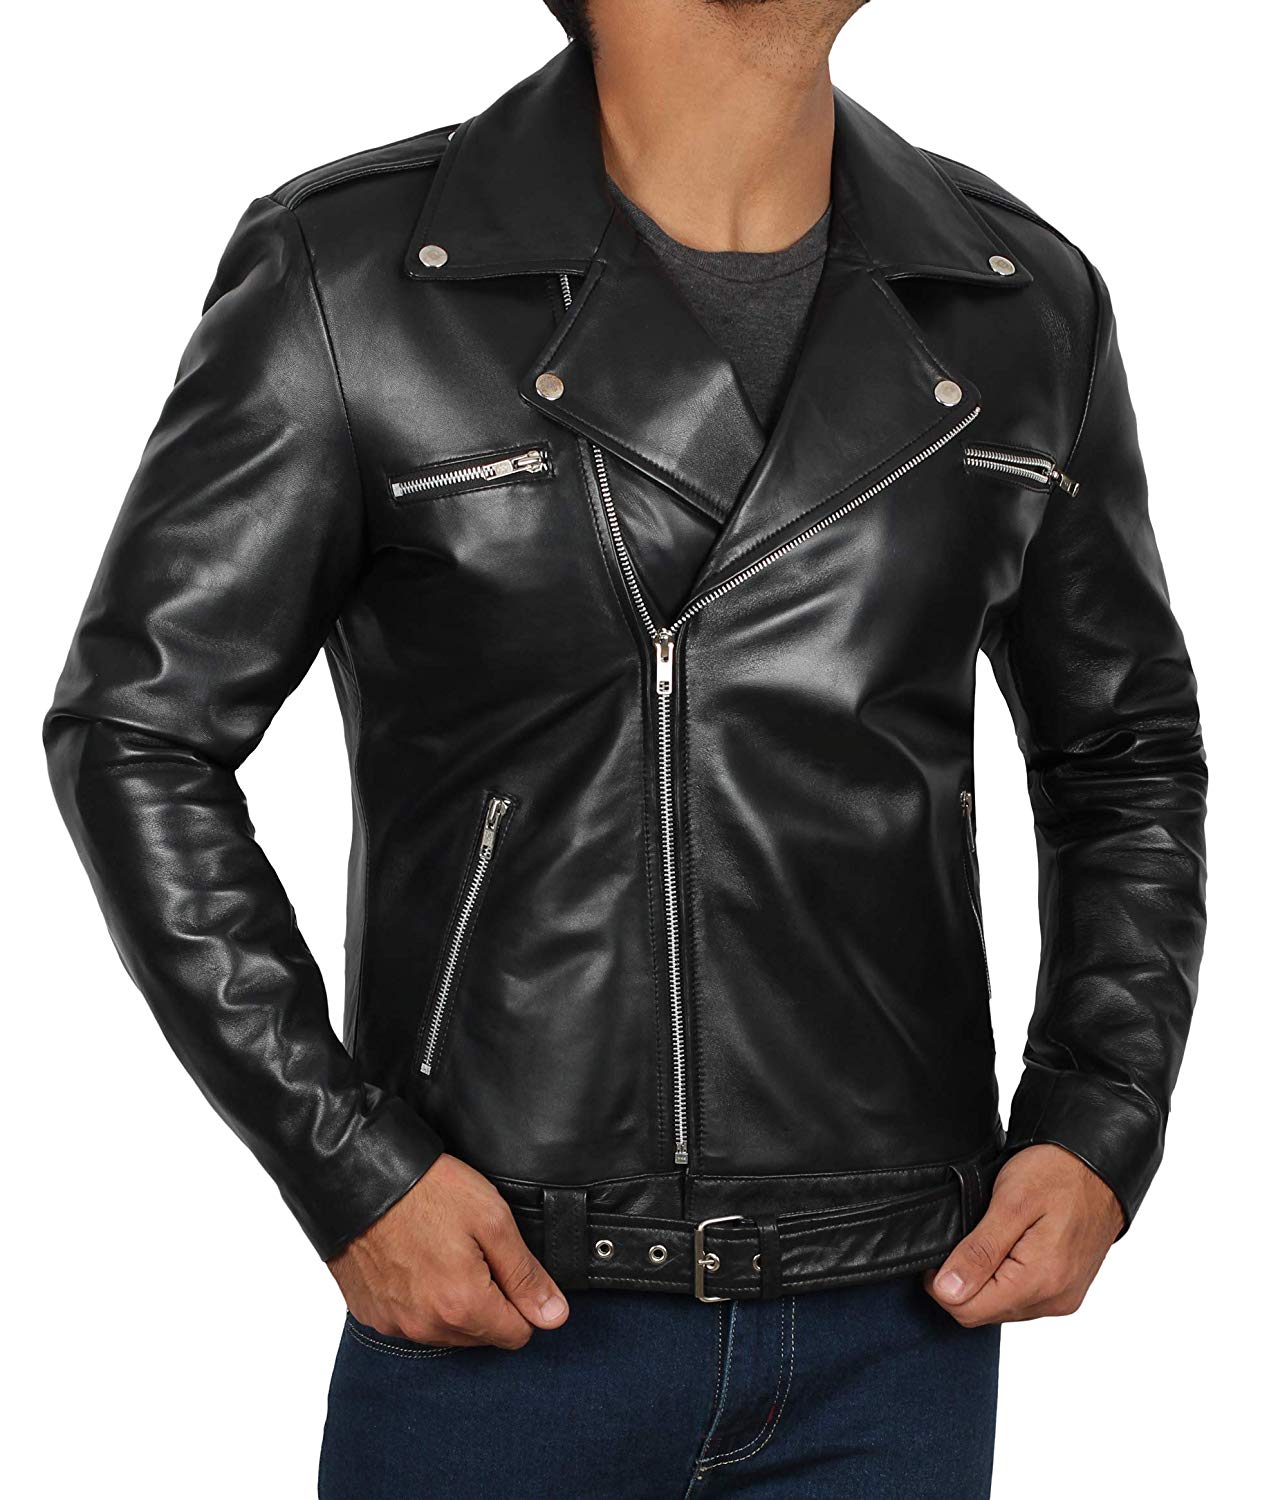 Negan Motorcycle Leather Jacket From The Walking Dead - Leather 4 Ever